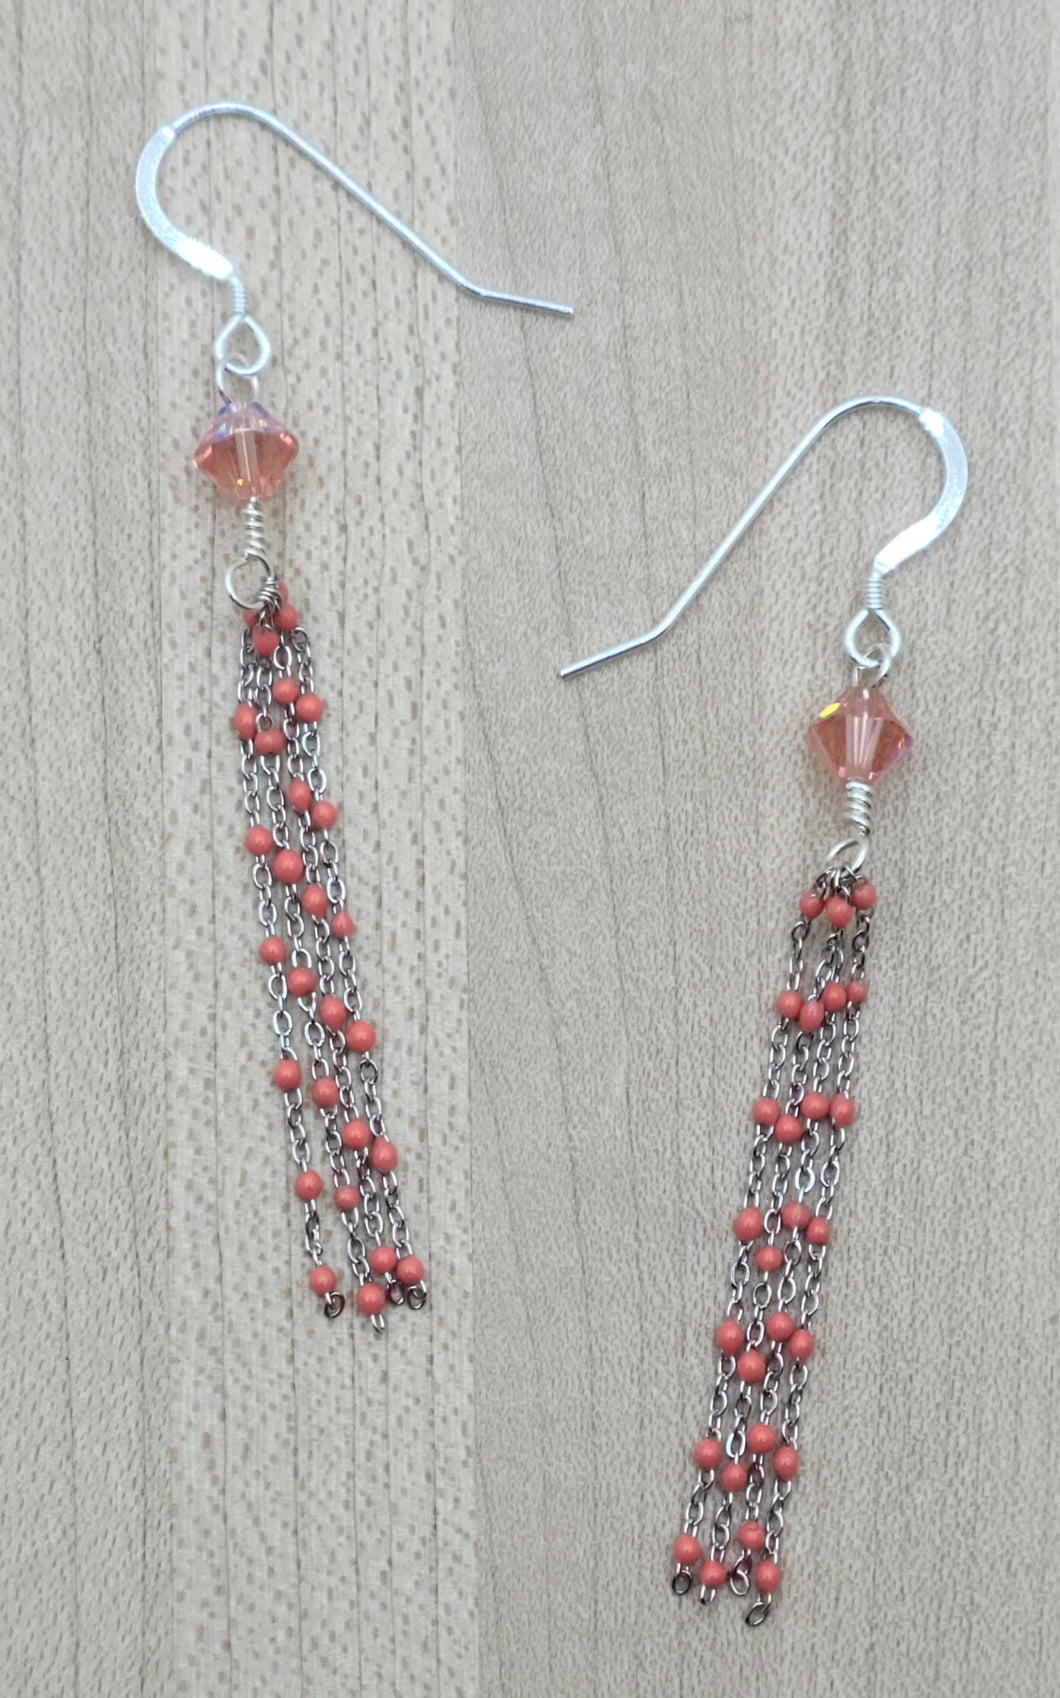 Coral dotted stainless steel tassels dangle from peach crystals in these very light-weight earrings.